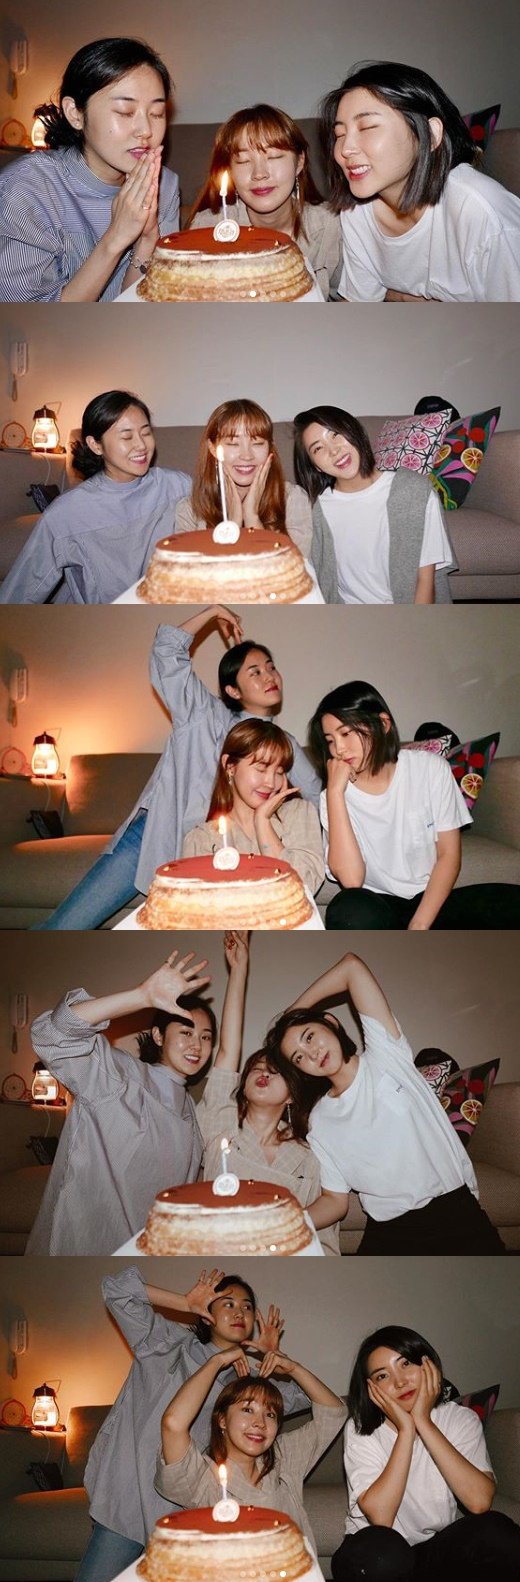 Heo Ga-yoon posted several photos on his SNS on the 19th with an article entitled I already believe it for 10 years.The photo shows Heo Ga-yoon, Jeon Ji-yoon, and Kwon So-hyun gathered in front of the 10th anniversary cake.The three enjoyed a happy time with a charming expression and pose.Heo Ga-yoon said, Im looking forward to it now. And Im sorry. Im sorry. Its hard to say in one sentence.Well be together next time, not together. Three others. I saw you a few days ago. Stop. Happy 10th anniversary.Jeon Ji-yoon and Kwon So-hyun also celebrated their 10th anniversary of their 4Minute debut on social media, with Jeon Ji-yoon saying: Were already 10th anniversary, were still fresh.Thank you for the congratulations. I will do it with three people like this. Kwon So-hyun also posted a photo of the party on his SNS with a message saying, I had a simple but pleasant 10th anniversary celebration party. I can not celebrate with all of them because I have a schedule, but I am grateful that I can gather steadily.Meanwhile, 4Minute (Son Ji-hyun, Heo Ga-yoon and Jeon Ji-yoon and Kim Hyun-ah and Kwon So-hyun), who debuted in 2009, officially disbanded after their contract with agency Cube Entertainment expired in 2016.